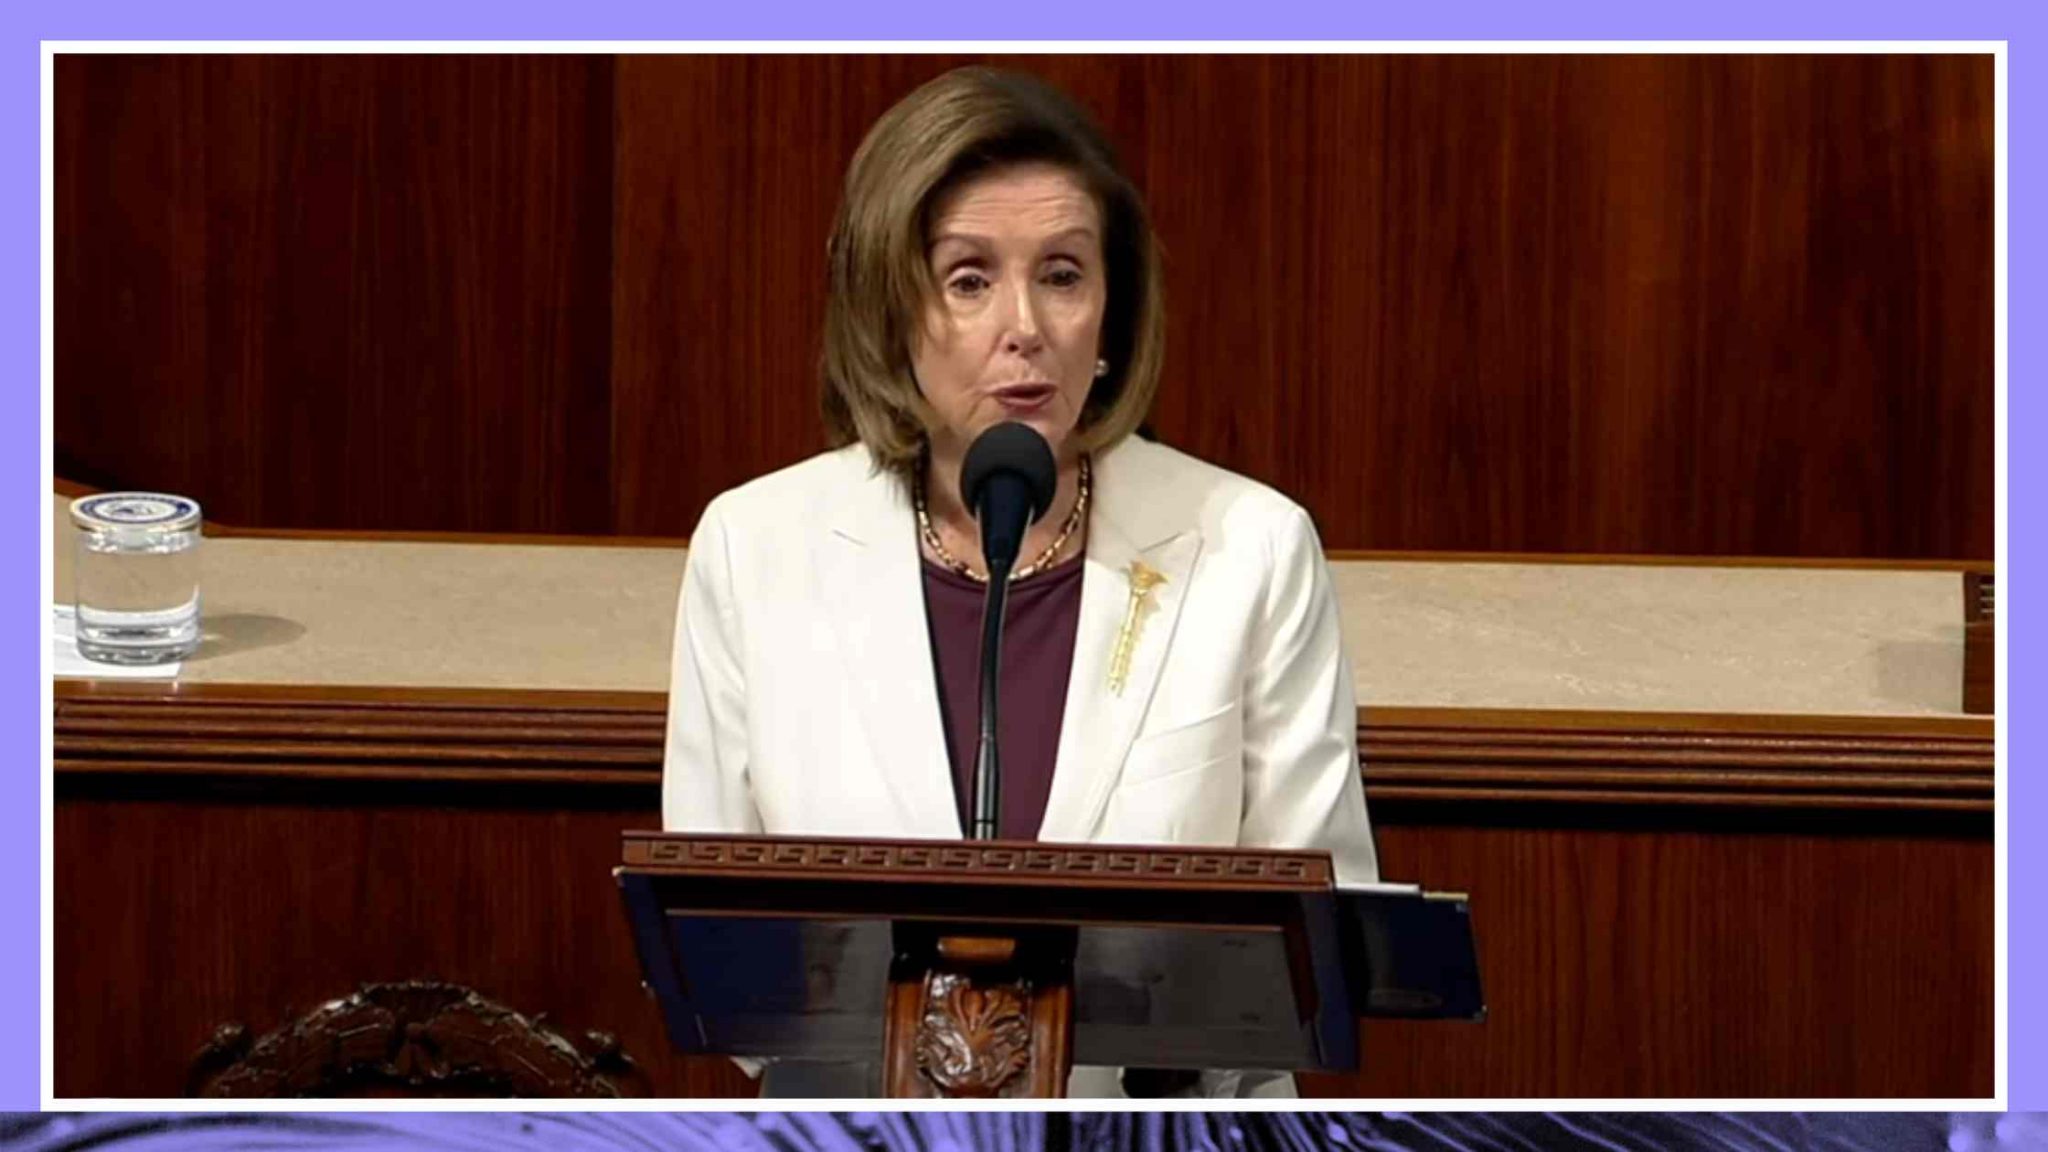 Nancy Pelosi says she will step down from Democratic leadership role Transcript